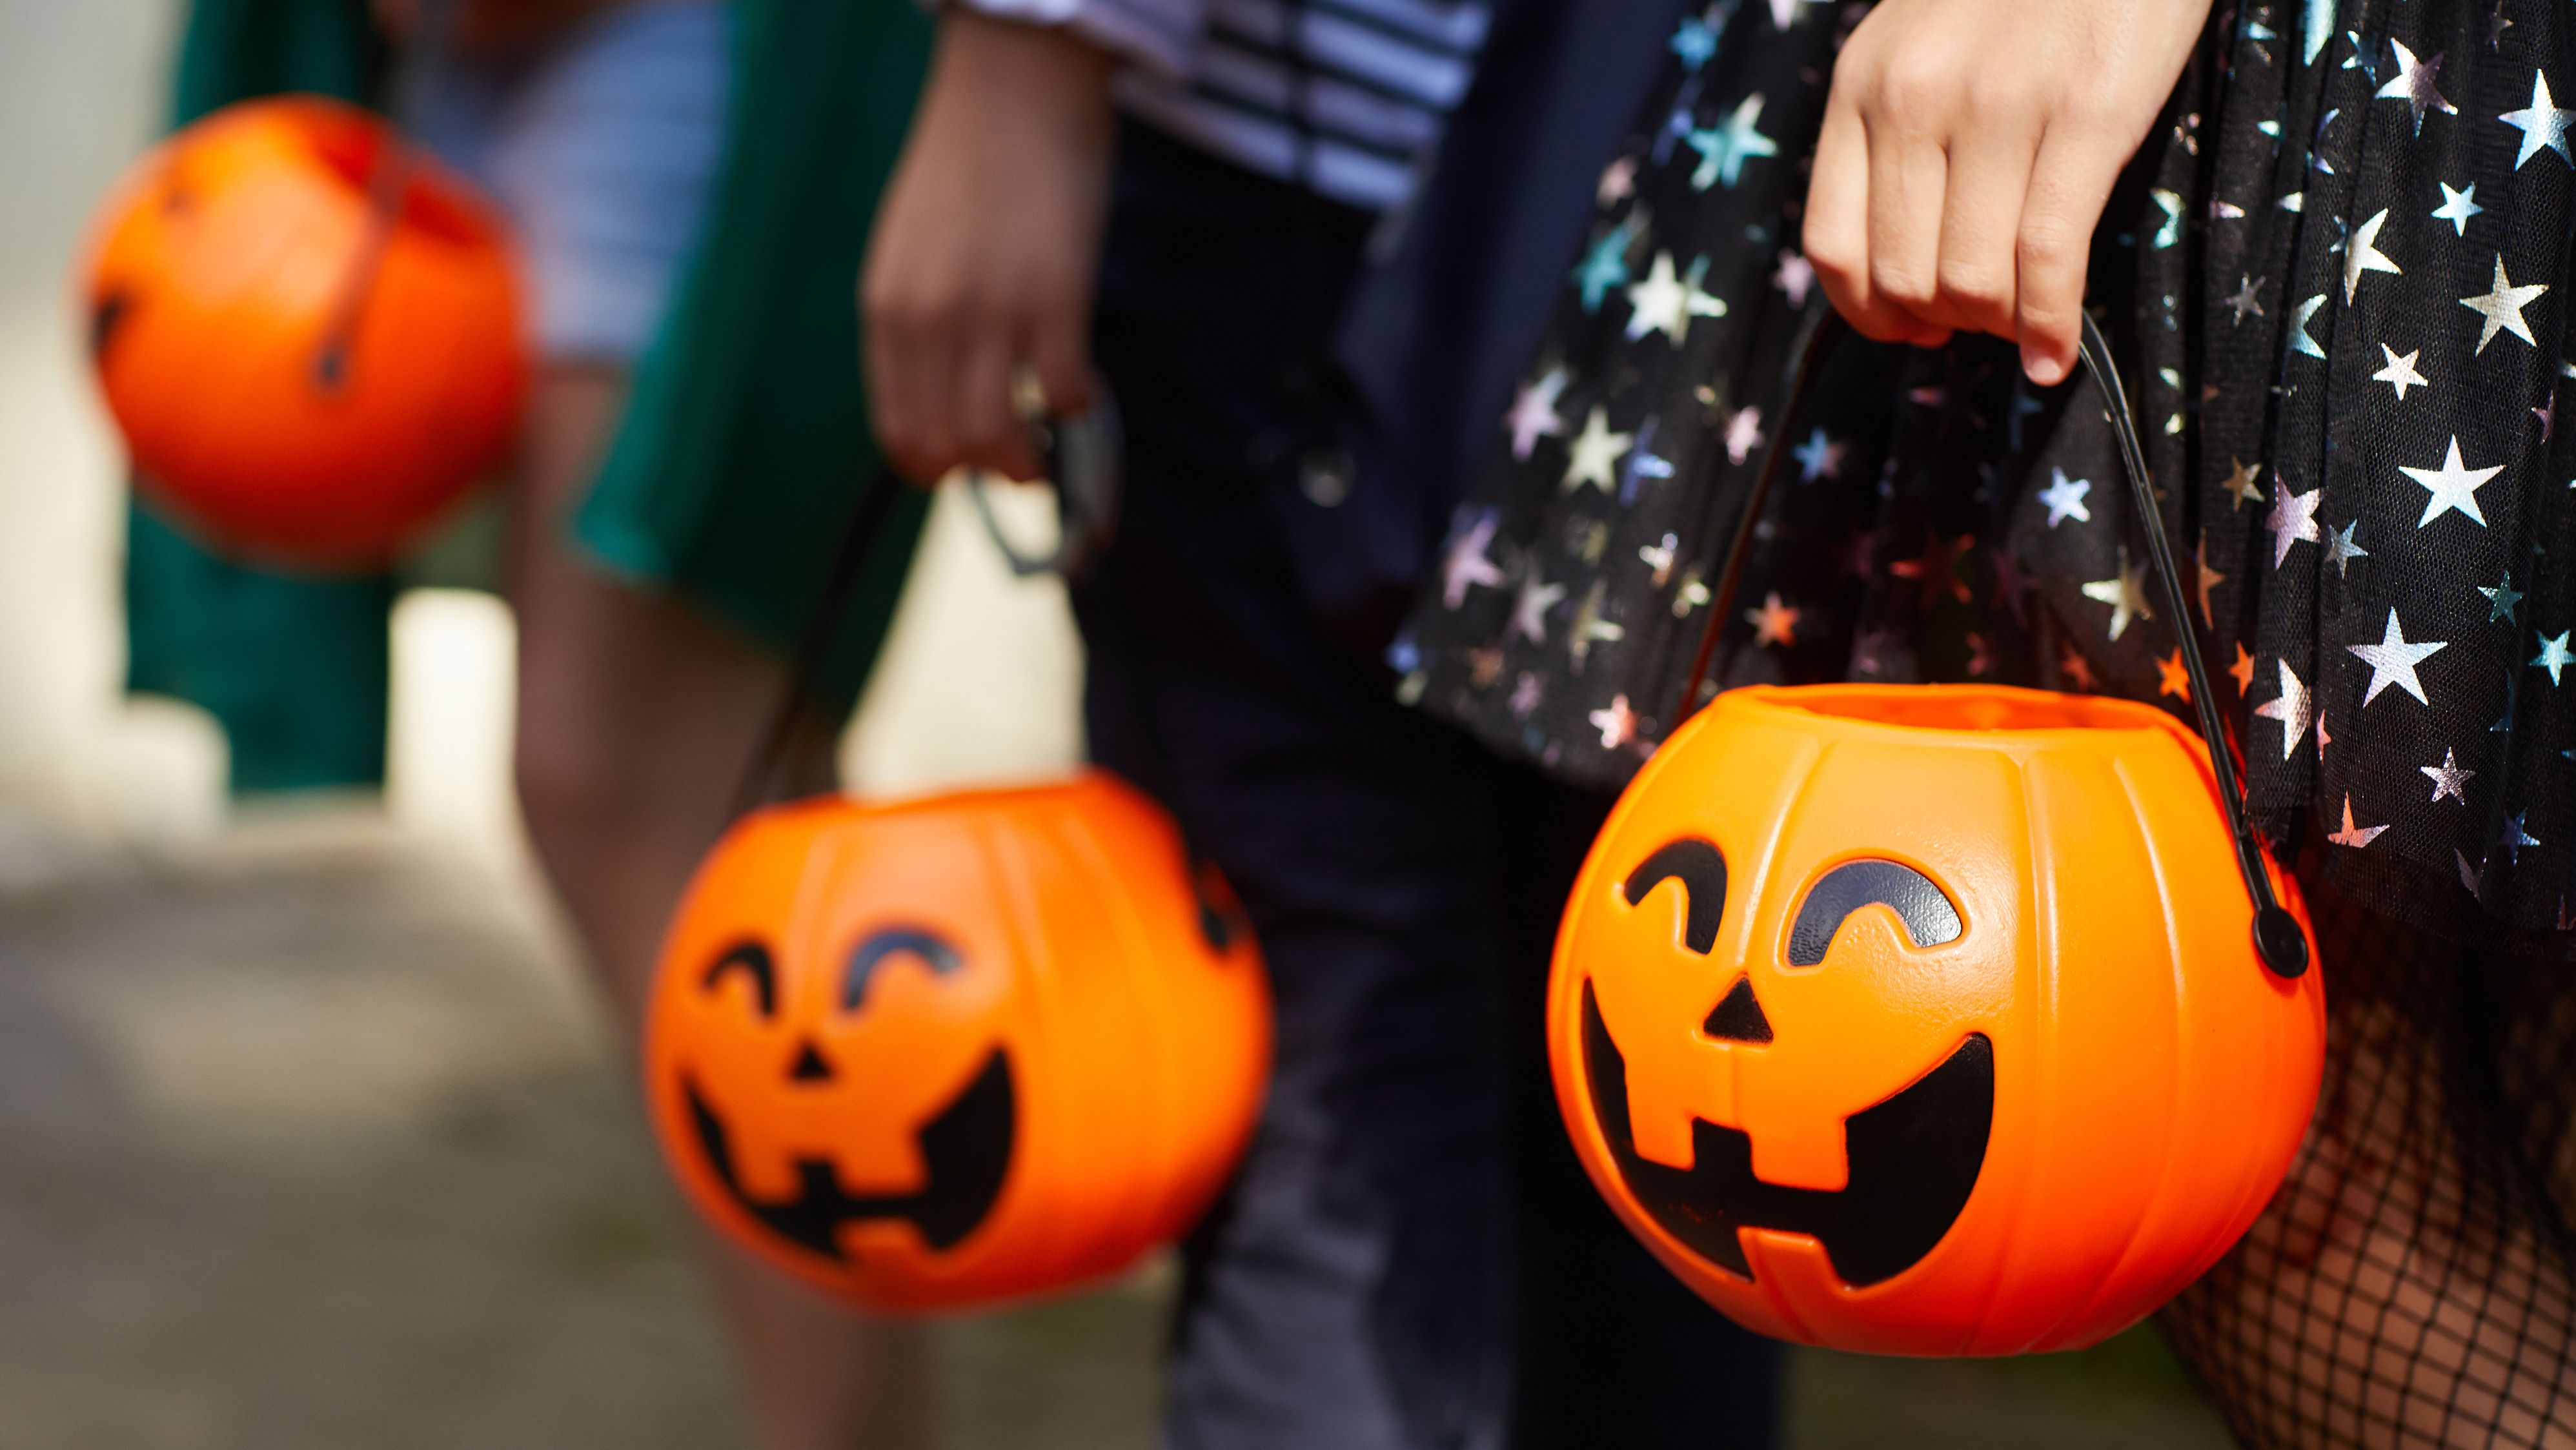 Many US states take extra measures to protect young trick-or-treaters from harm on Halloween.